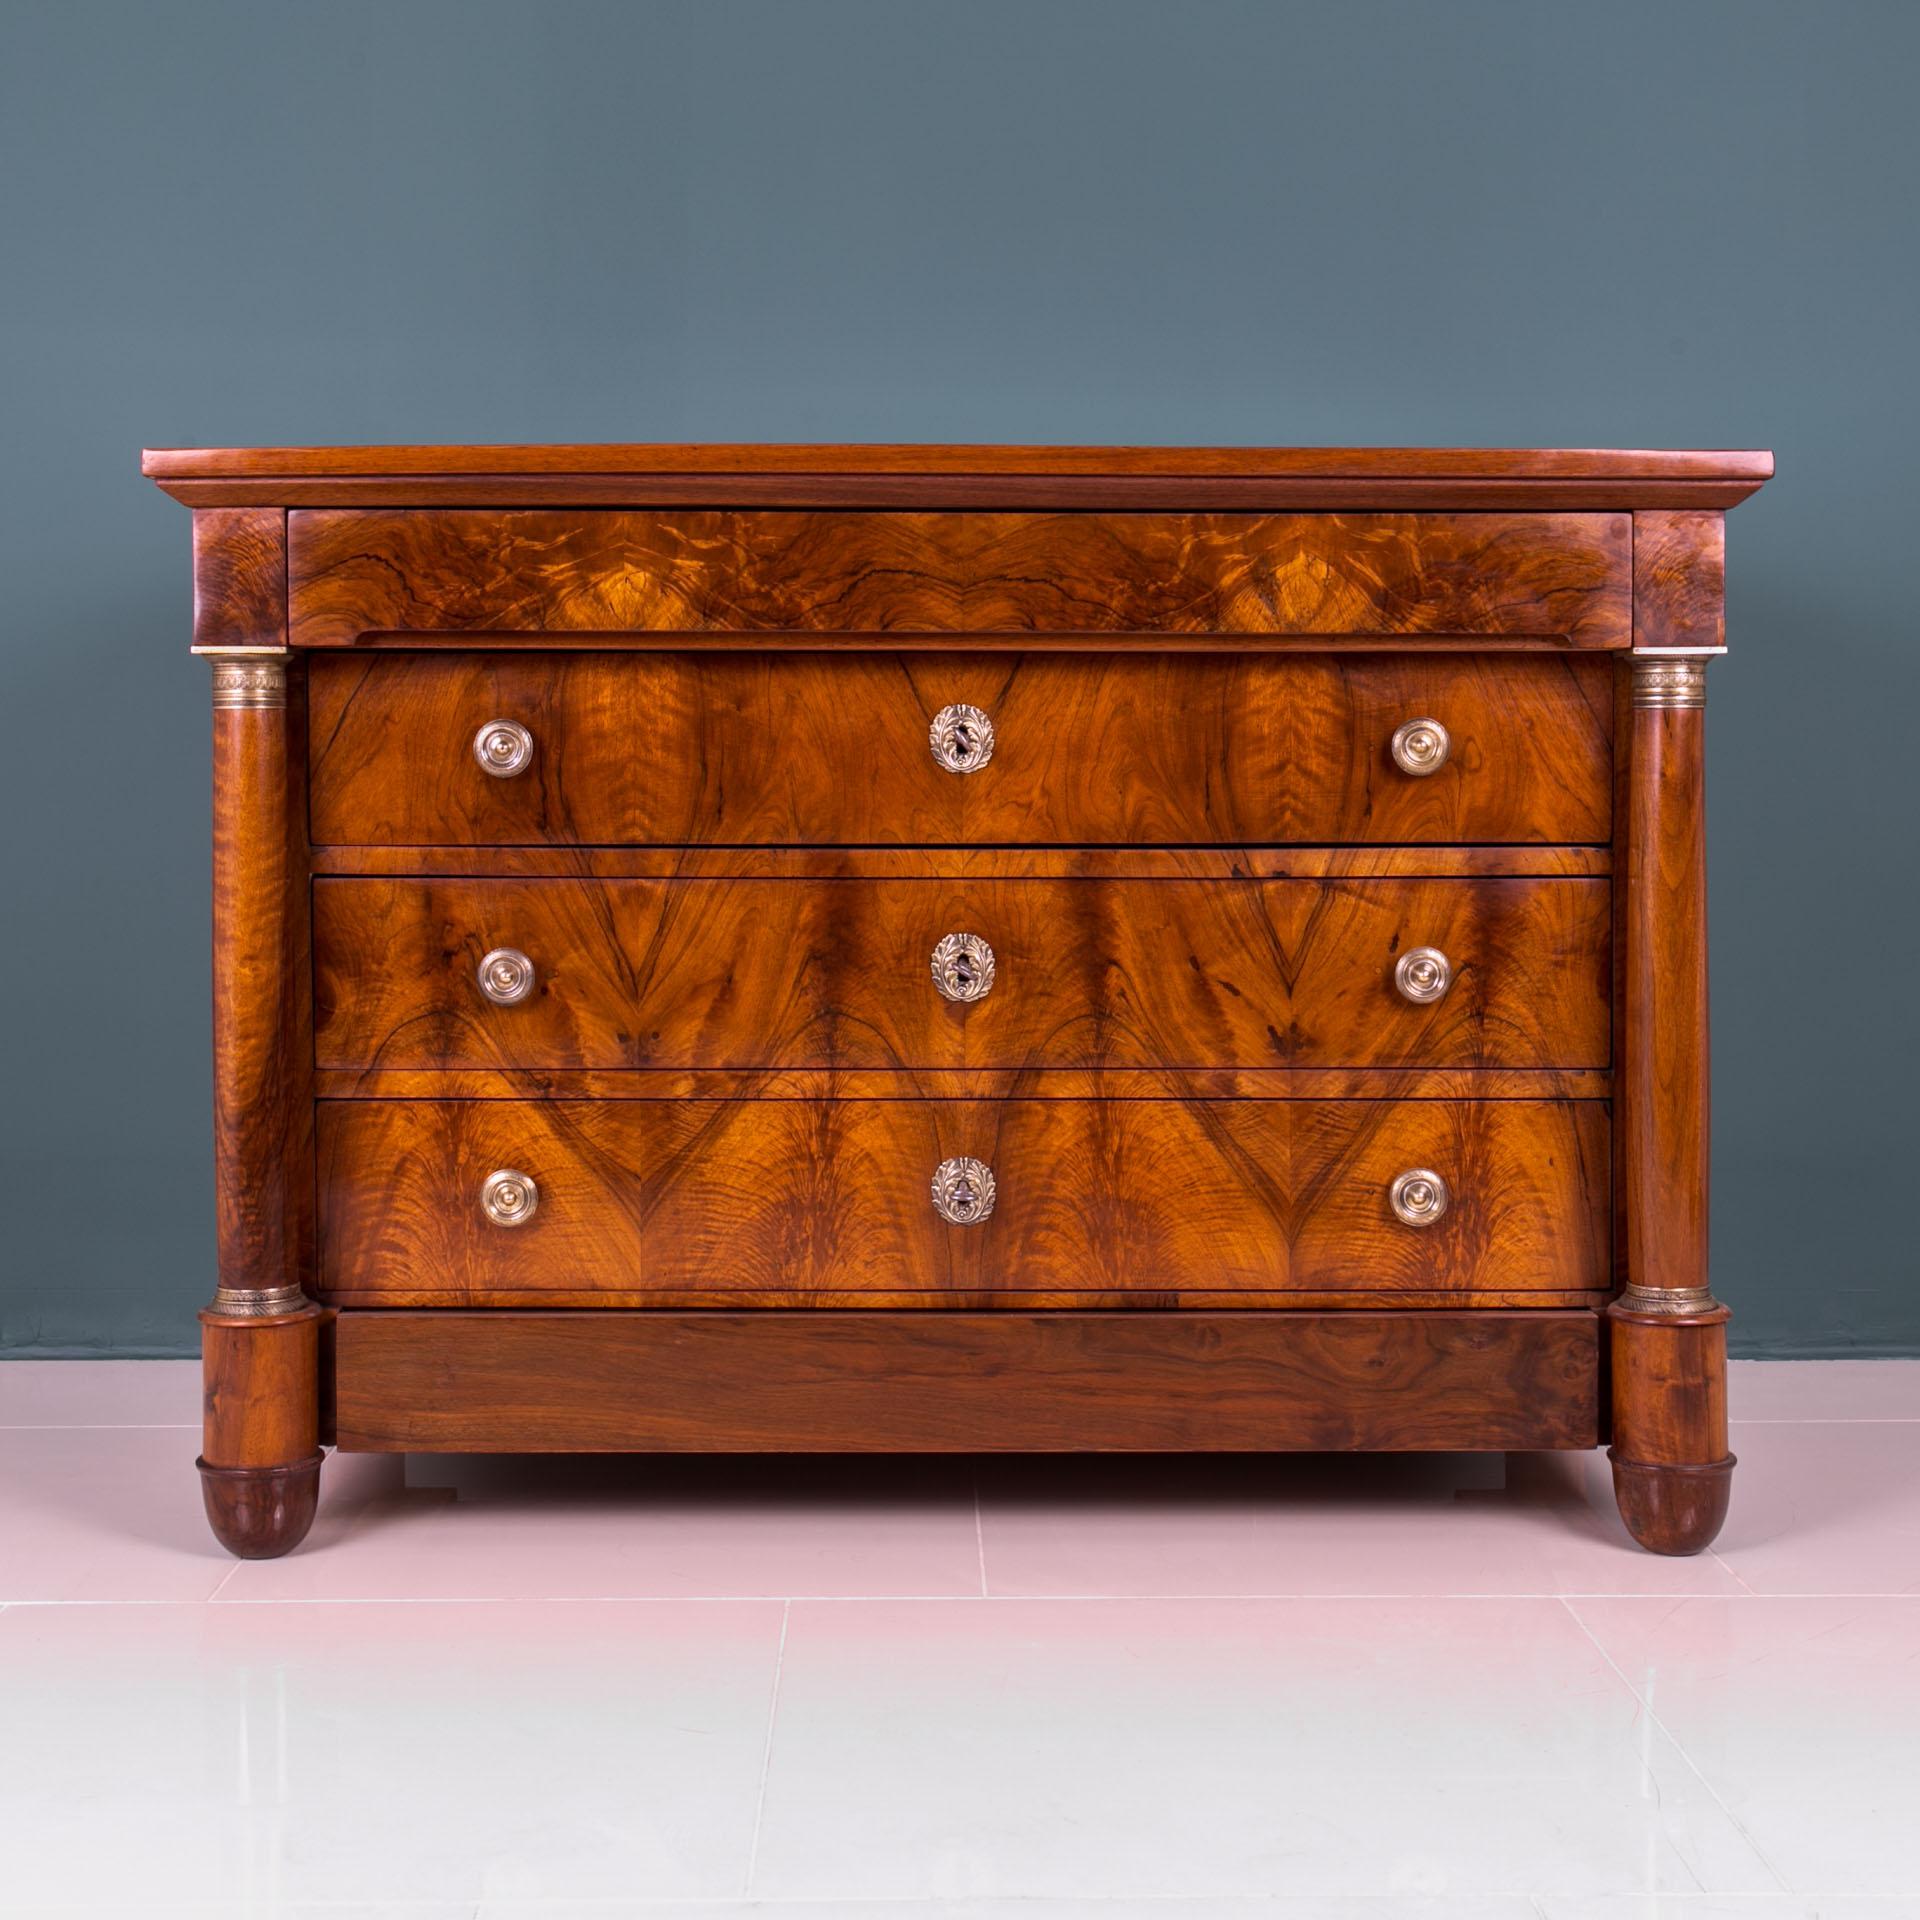 Biedermeier chest of drawers from 19th century, circa 1830s. This piece of furniture comes from France. It was made of softwood and veneered with beautiful walnut veneer. It is equipped with unique columns, decorated with brass decorations. It has